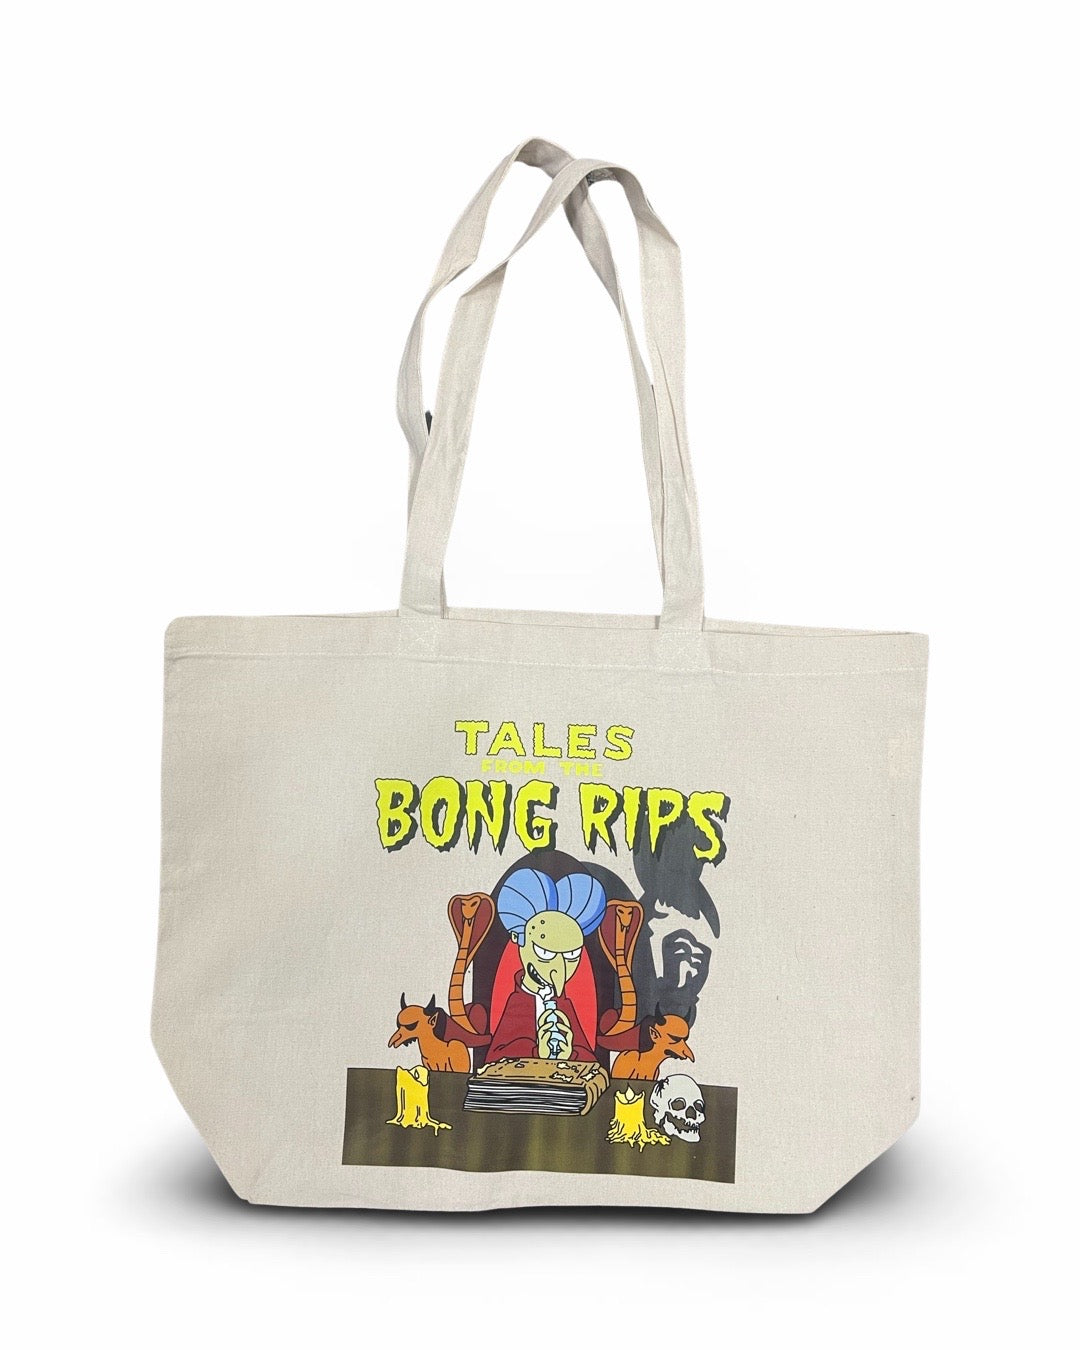 Tales from the bong rips tote bag